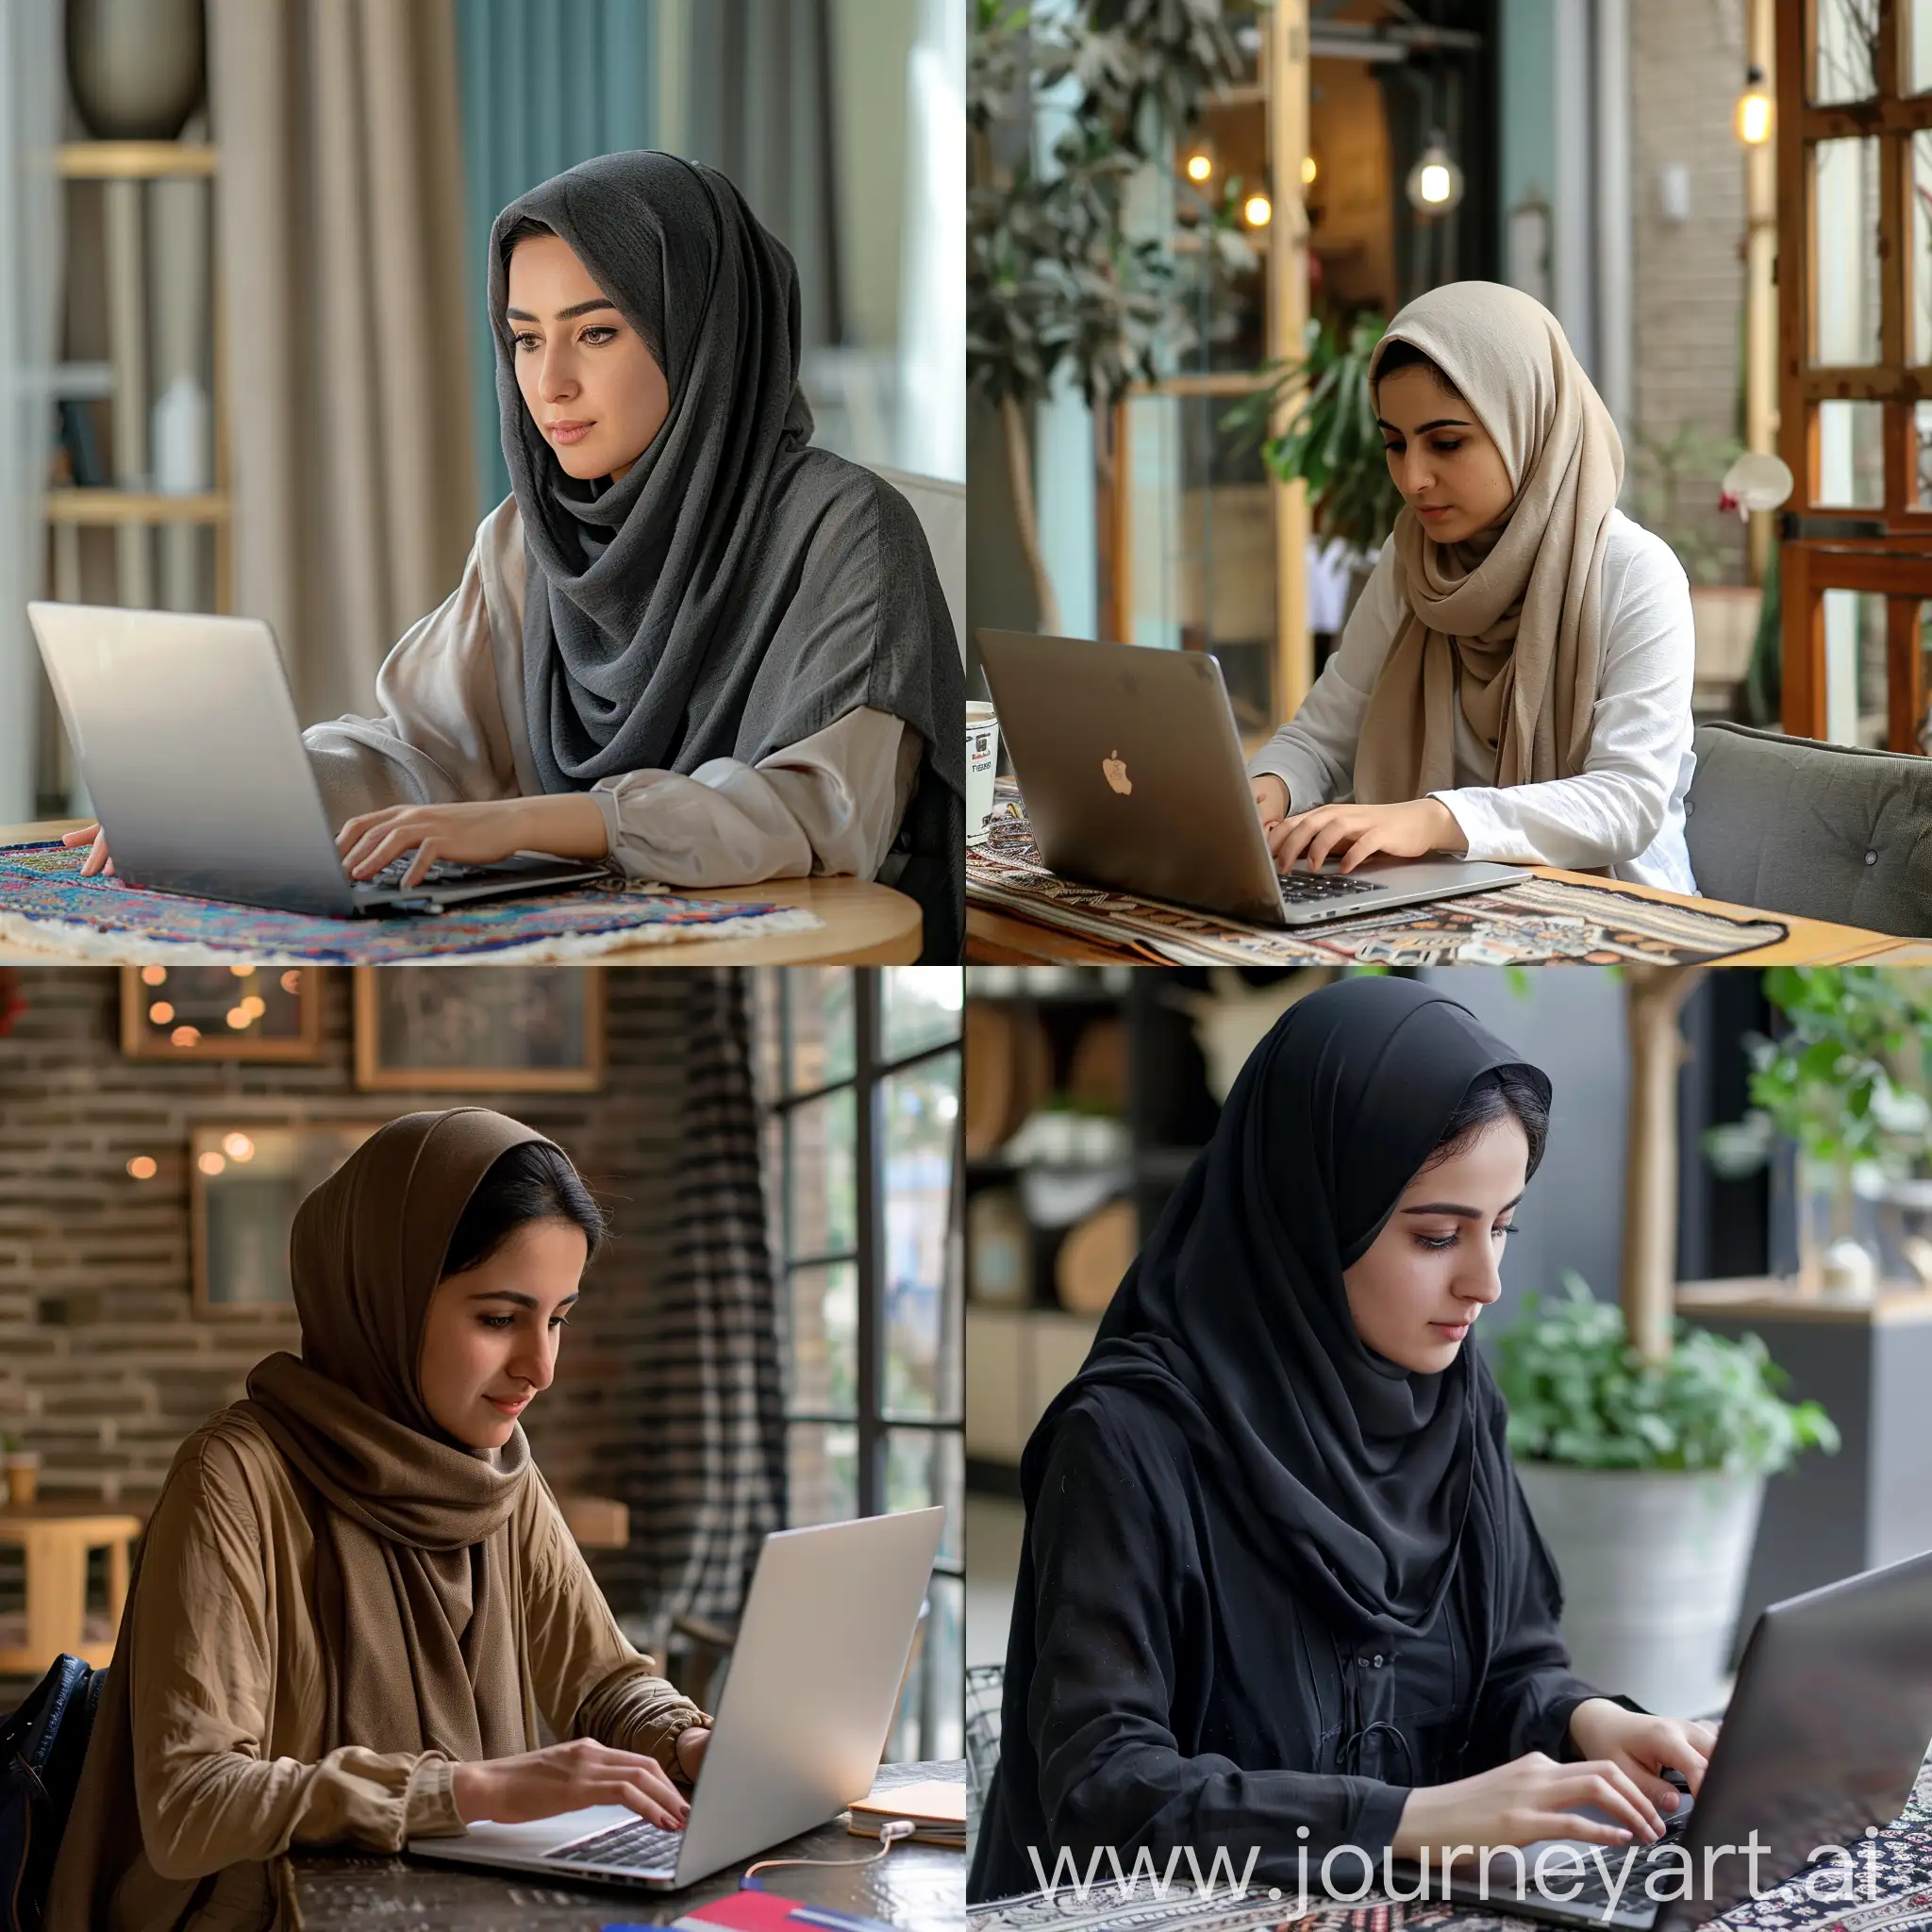 An Iranian girl wearing hijab, about 25 years old, working with a laptop at the table